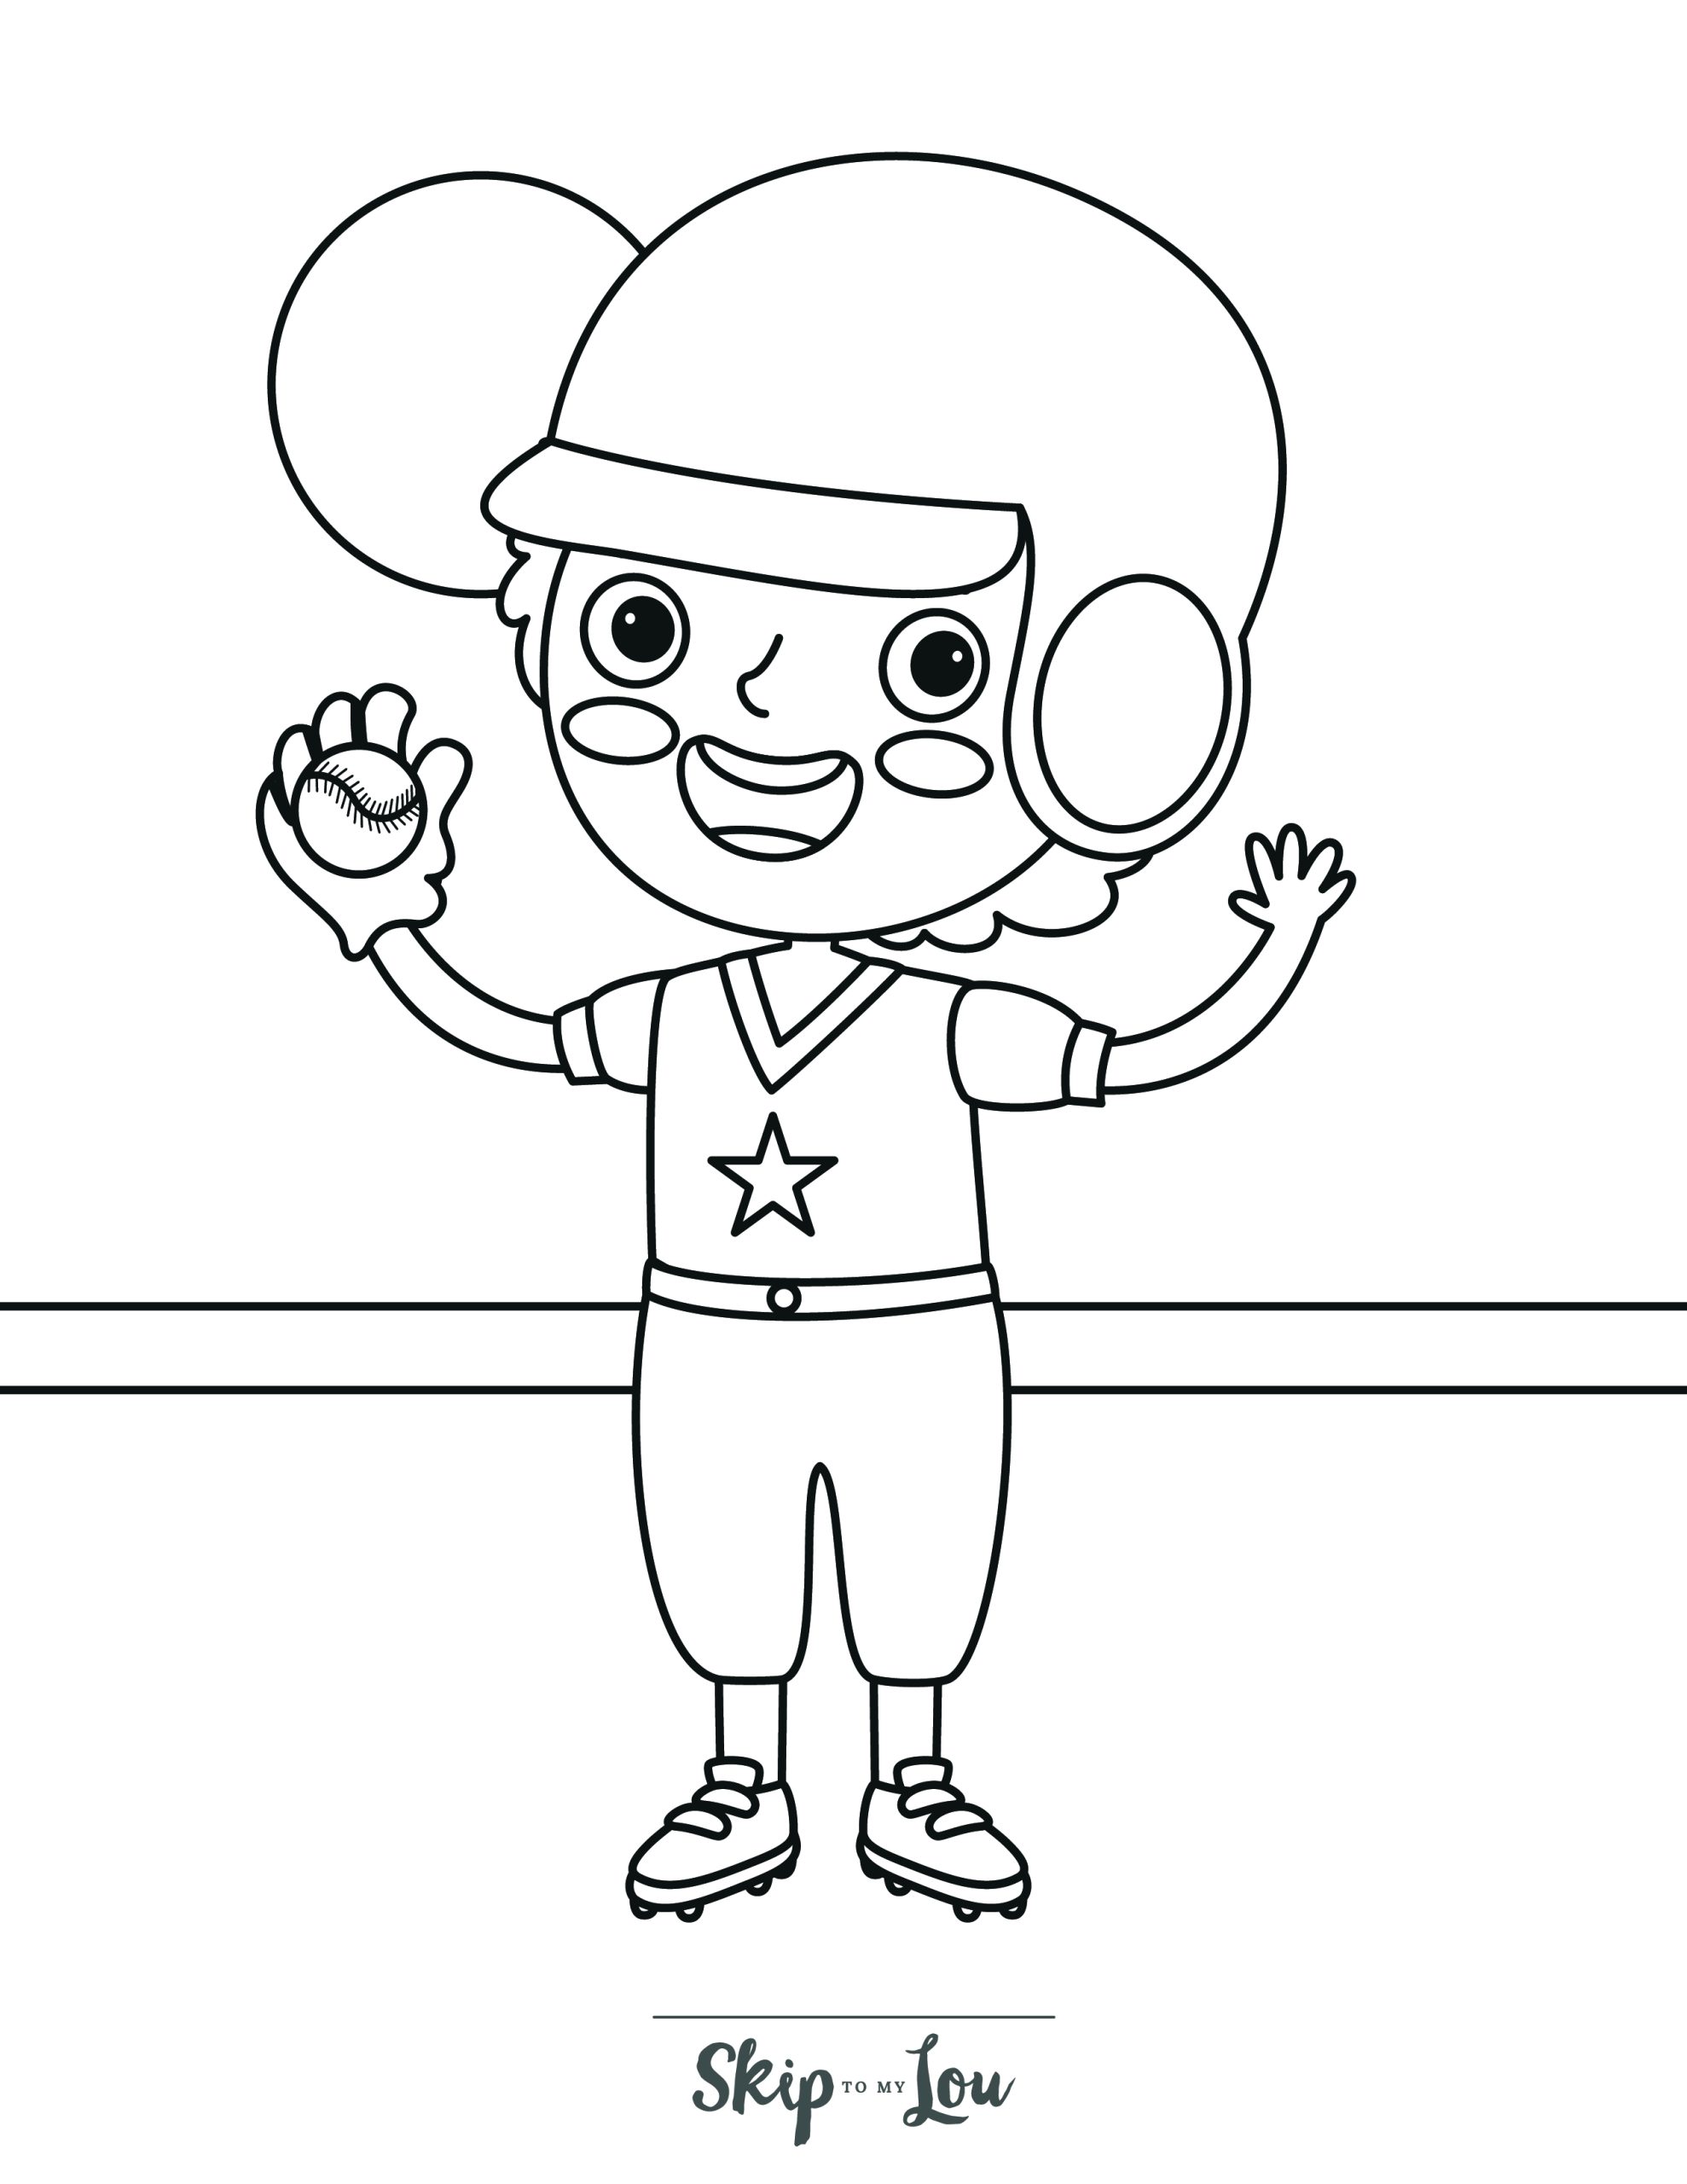 Baseball Coloring Page 6 - A line drawing of a happy baseball boy. He has his hands up, celebrating a catch with the baseball in hand